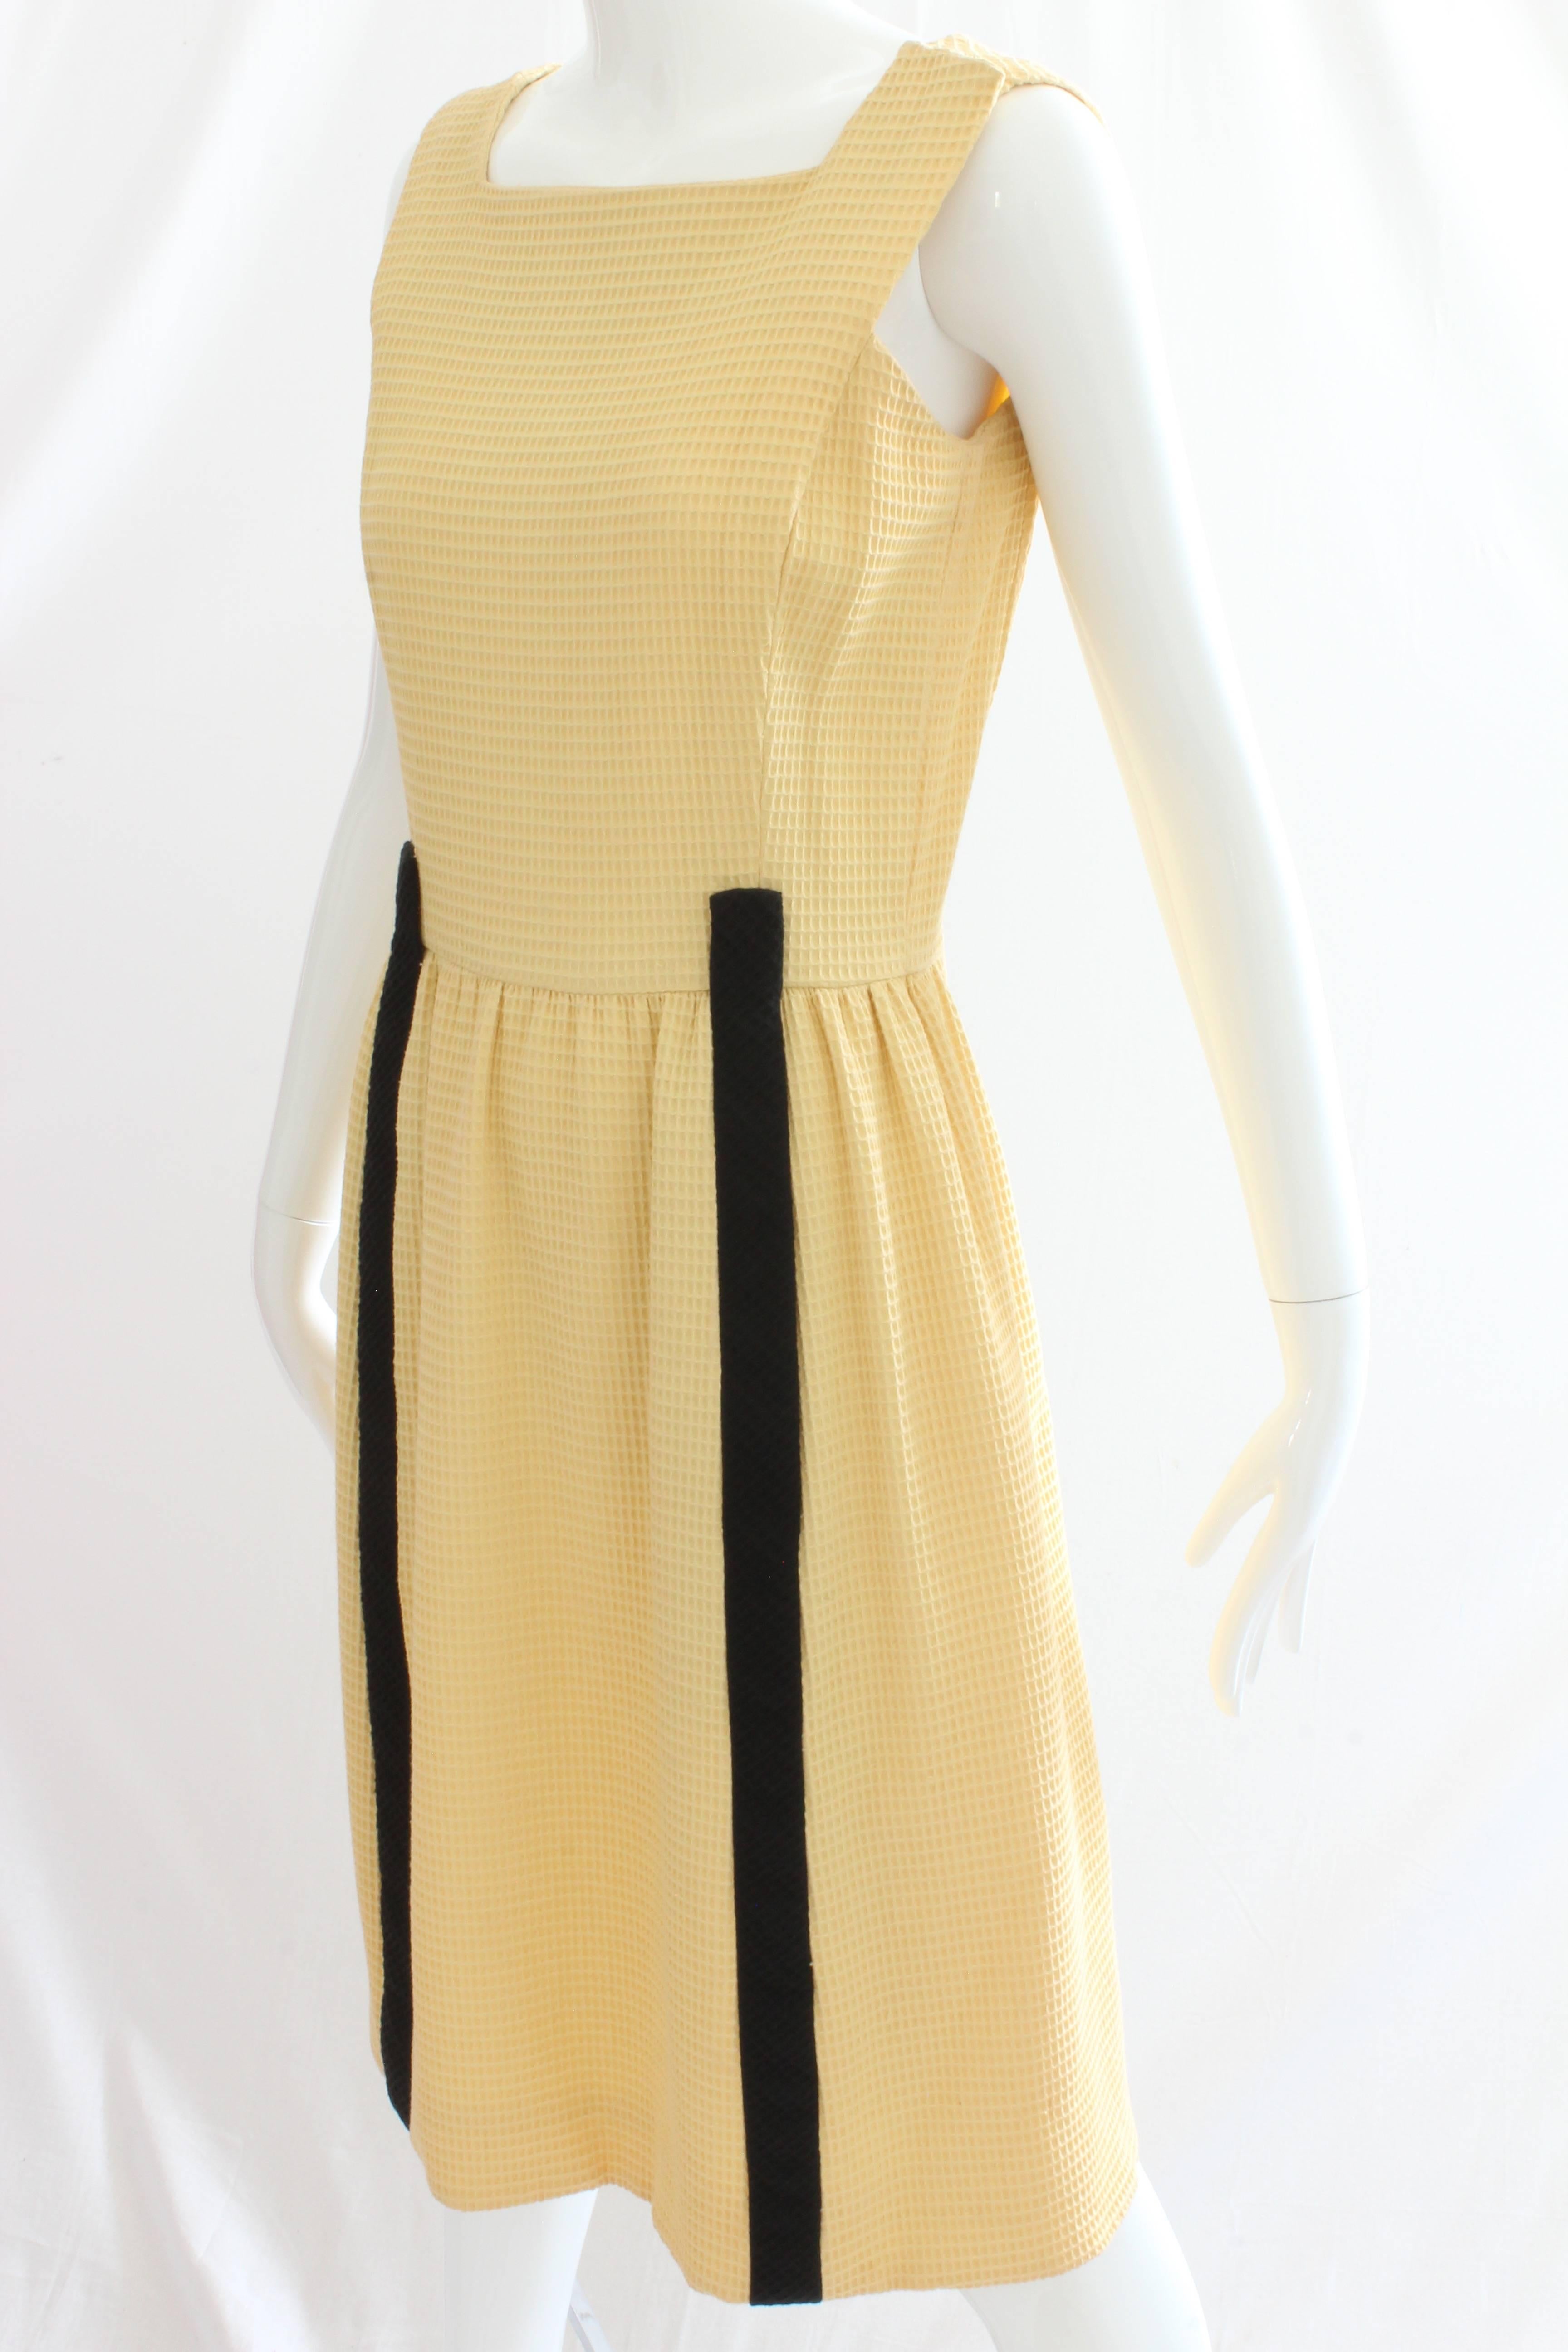 60s Chester Weinberg Jacket and Dress Ensemble 2pc Set Yellow Honeycomb Fabric S 2